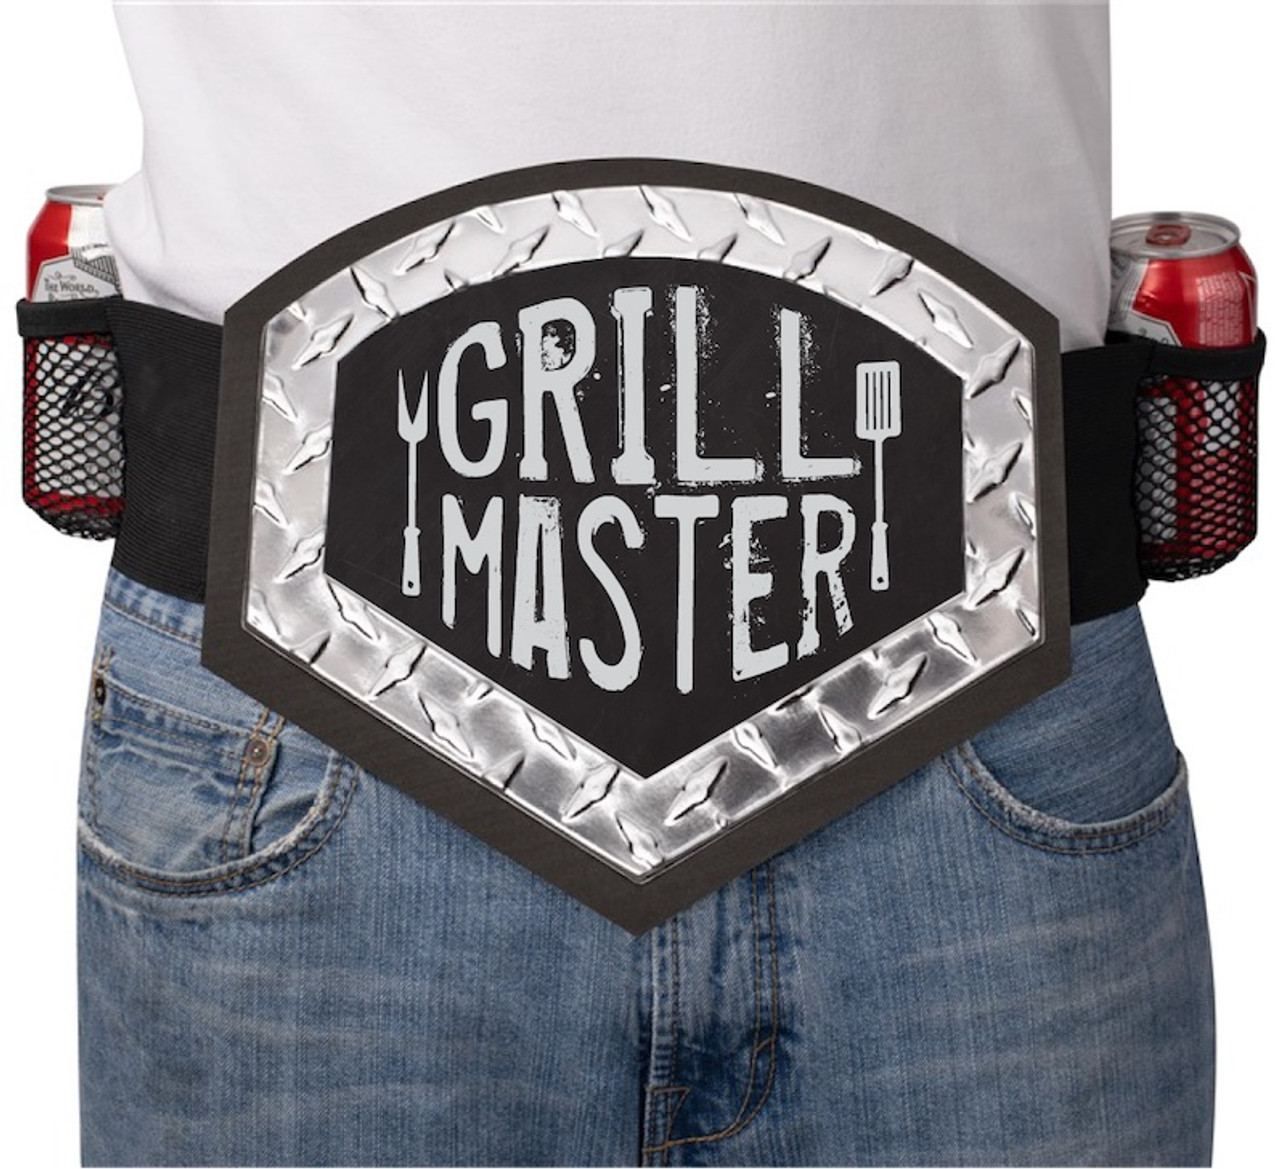 Best Grilling Gifts for Guys, Grill Gifts for Husband, Grill Master Gift  Ideas, Grilling Gifts for Men, Grill Master Party Belt